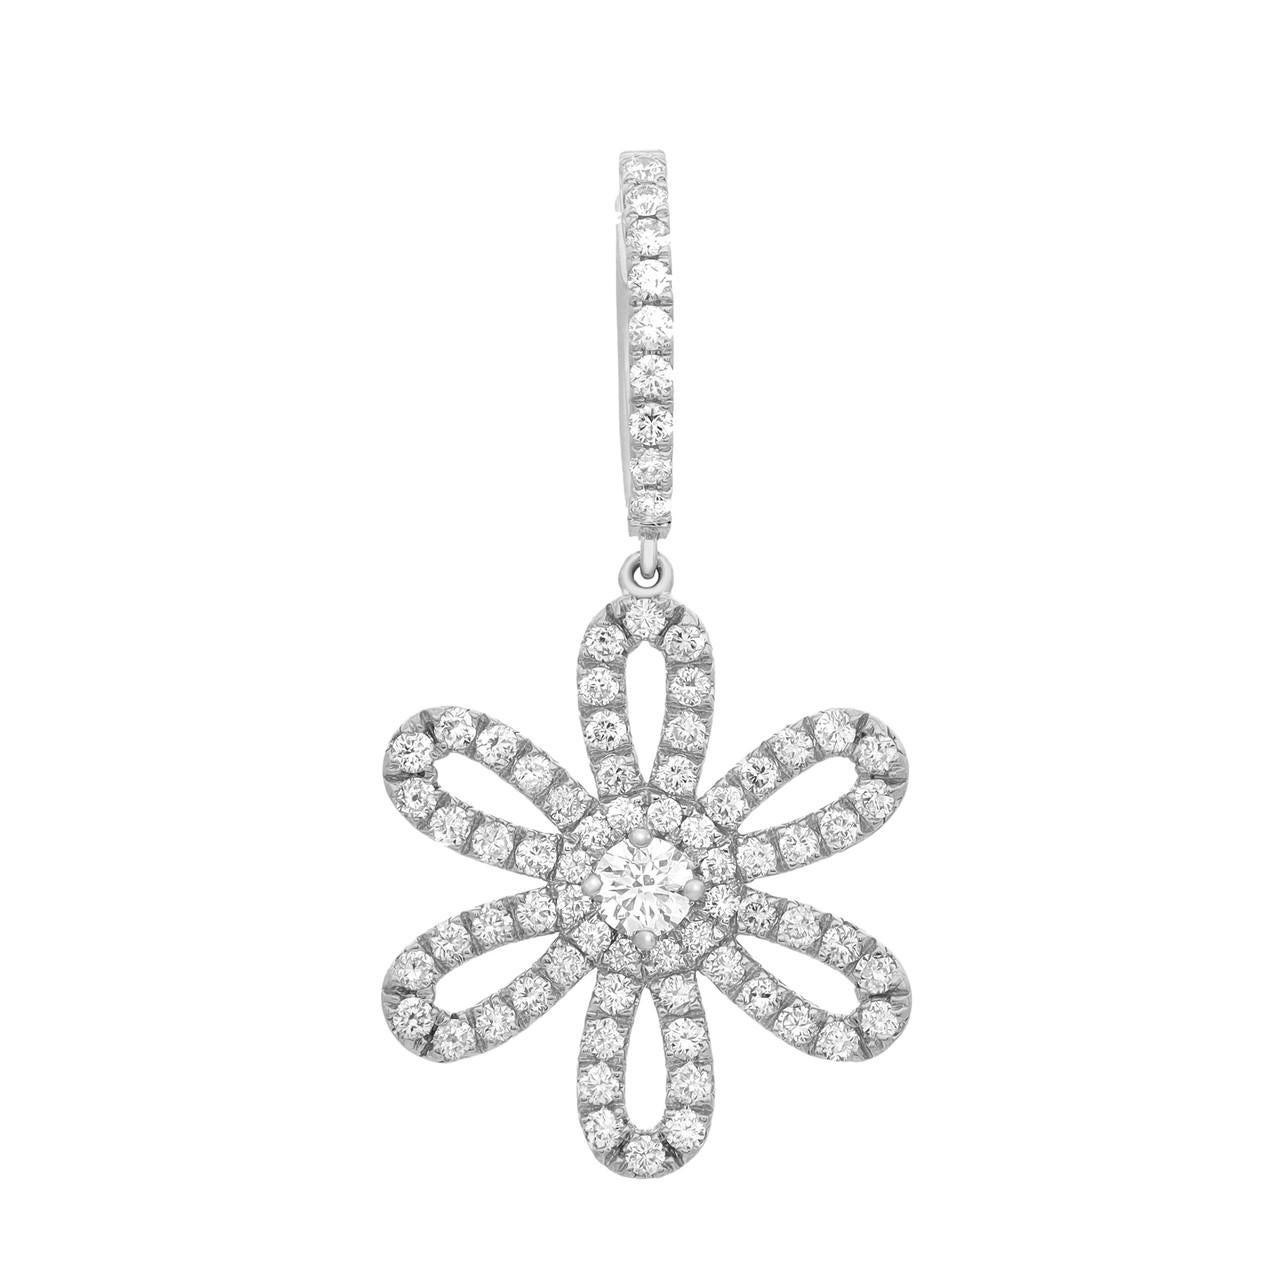 Immerse yourself in the allure of the 2.59 Carat Diamond Flower Drop Earrings in 18K White Gold. These exquisite earrings offer a captivating Daisy Diamond Daze. Crafted in 18K white gold, the floral motif dangle earrings feature a round brilliant